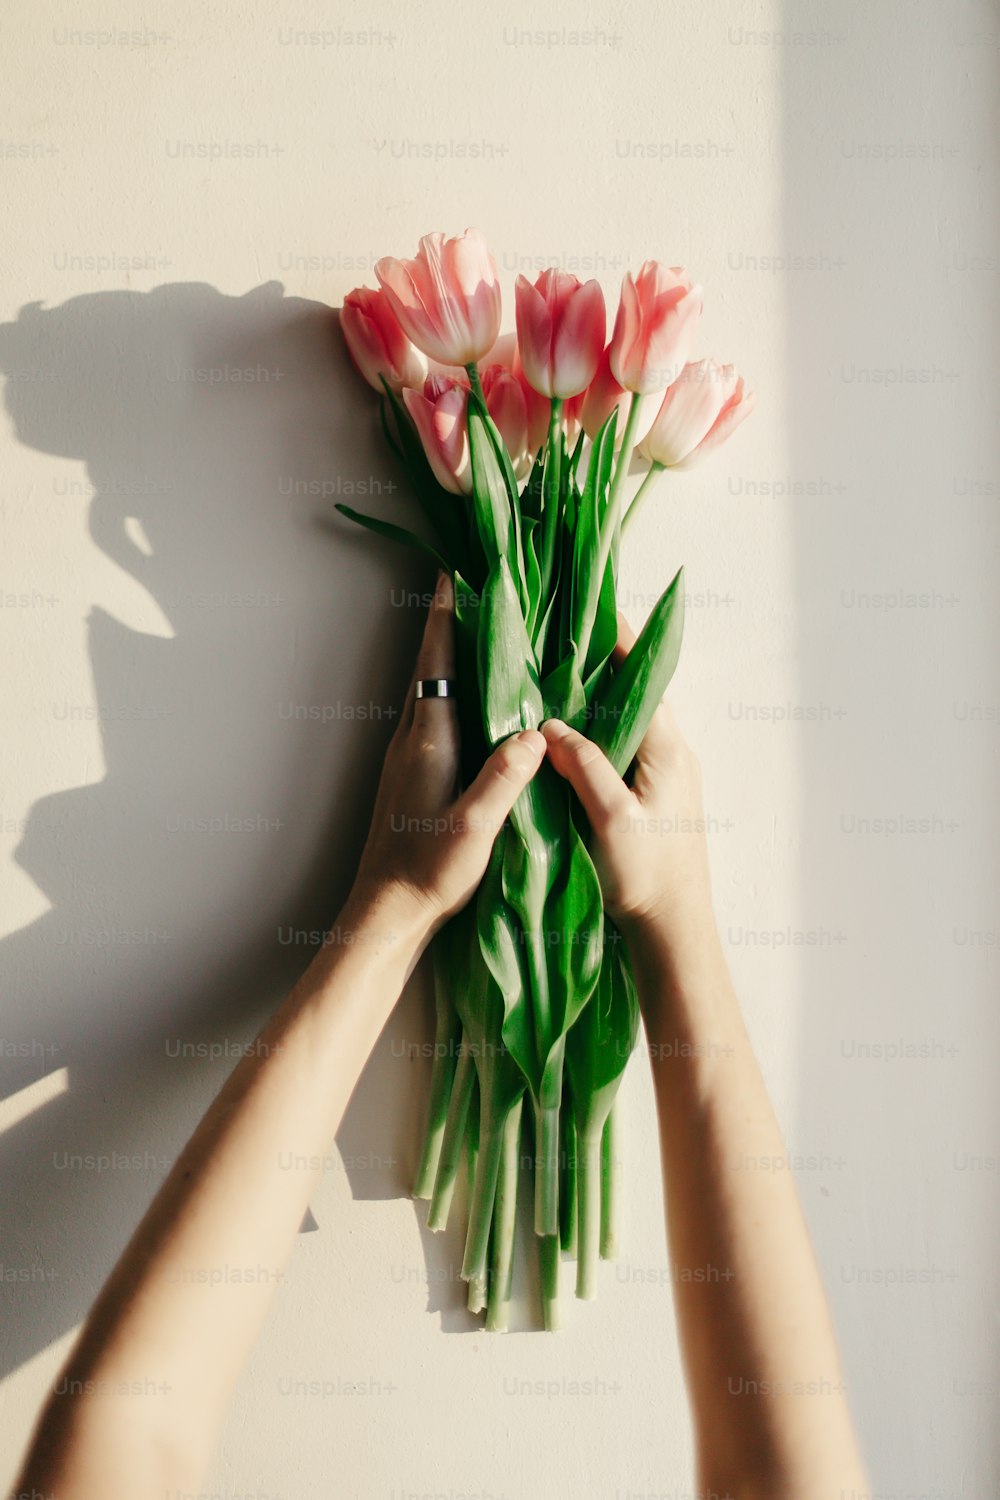 hands holding pink tulips in morning soft light on white rustic wall near window in home background. spring fresh mood. instagram blogging workshop concept. space for text